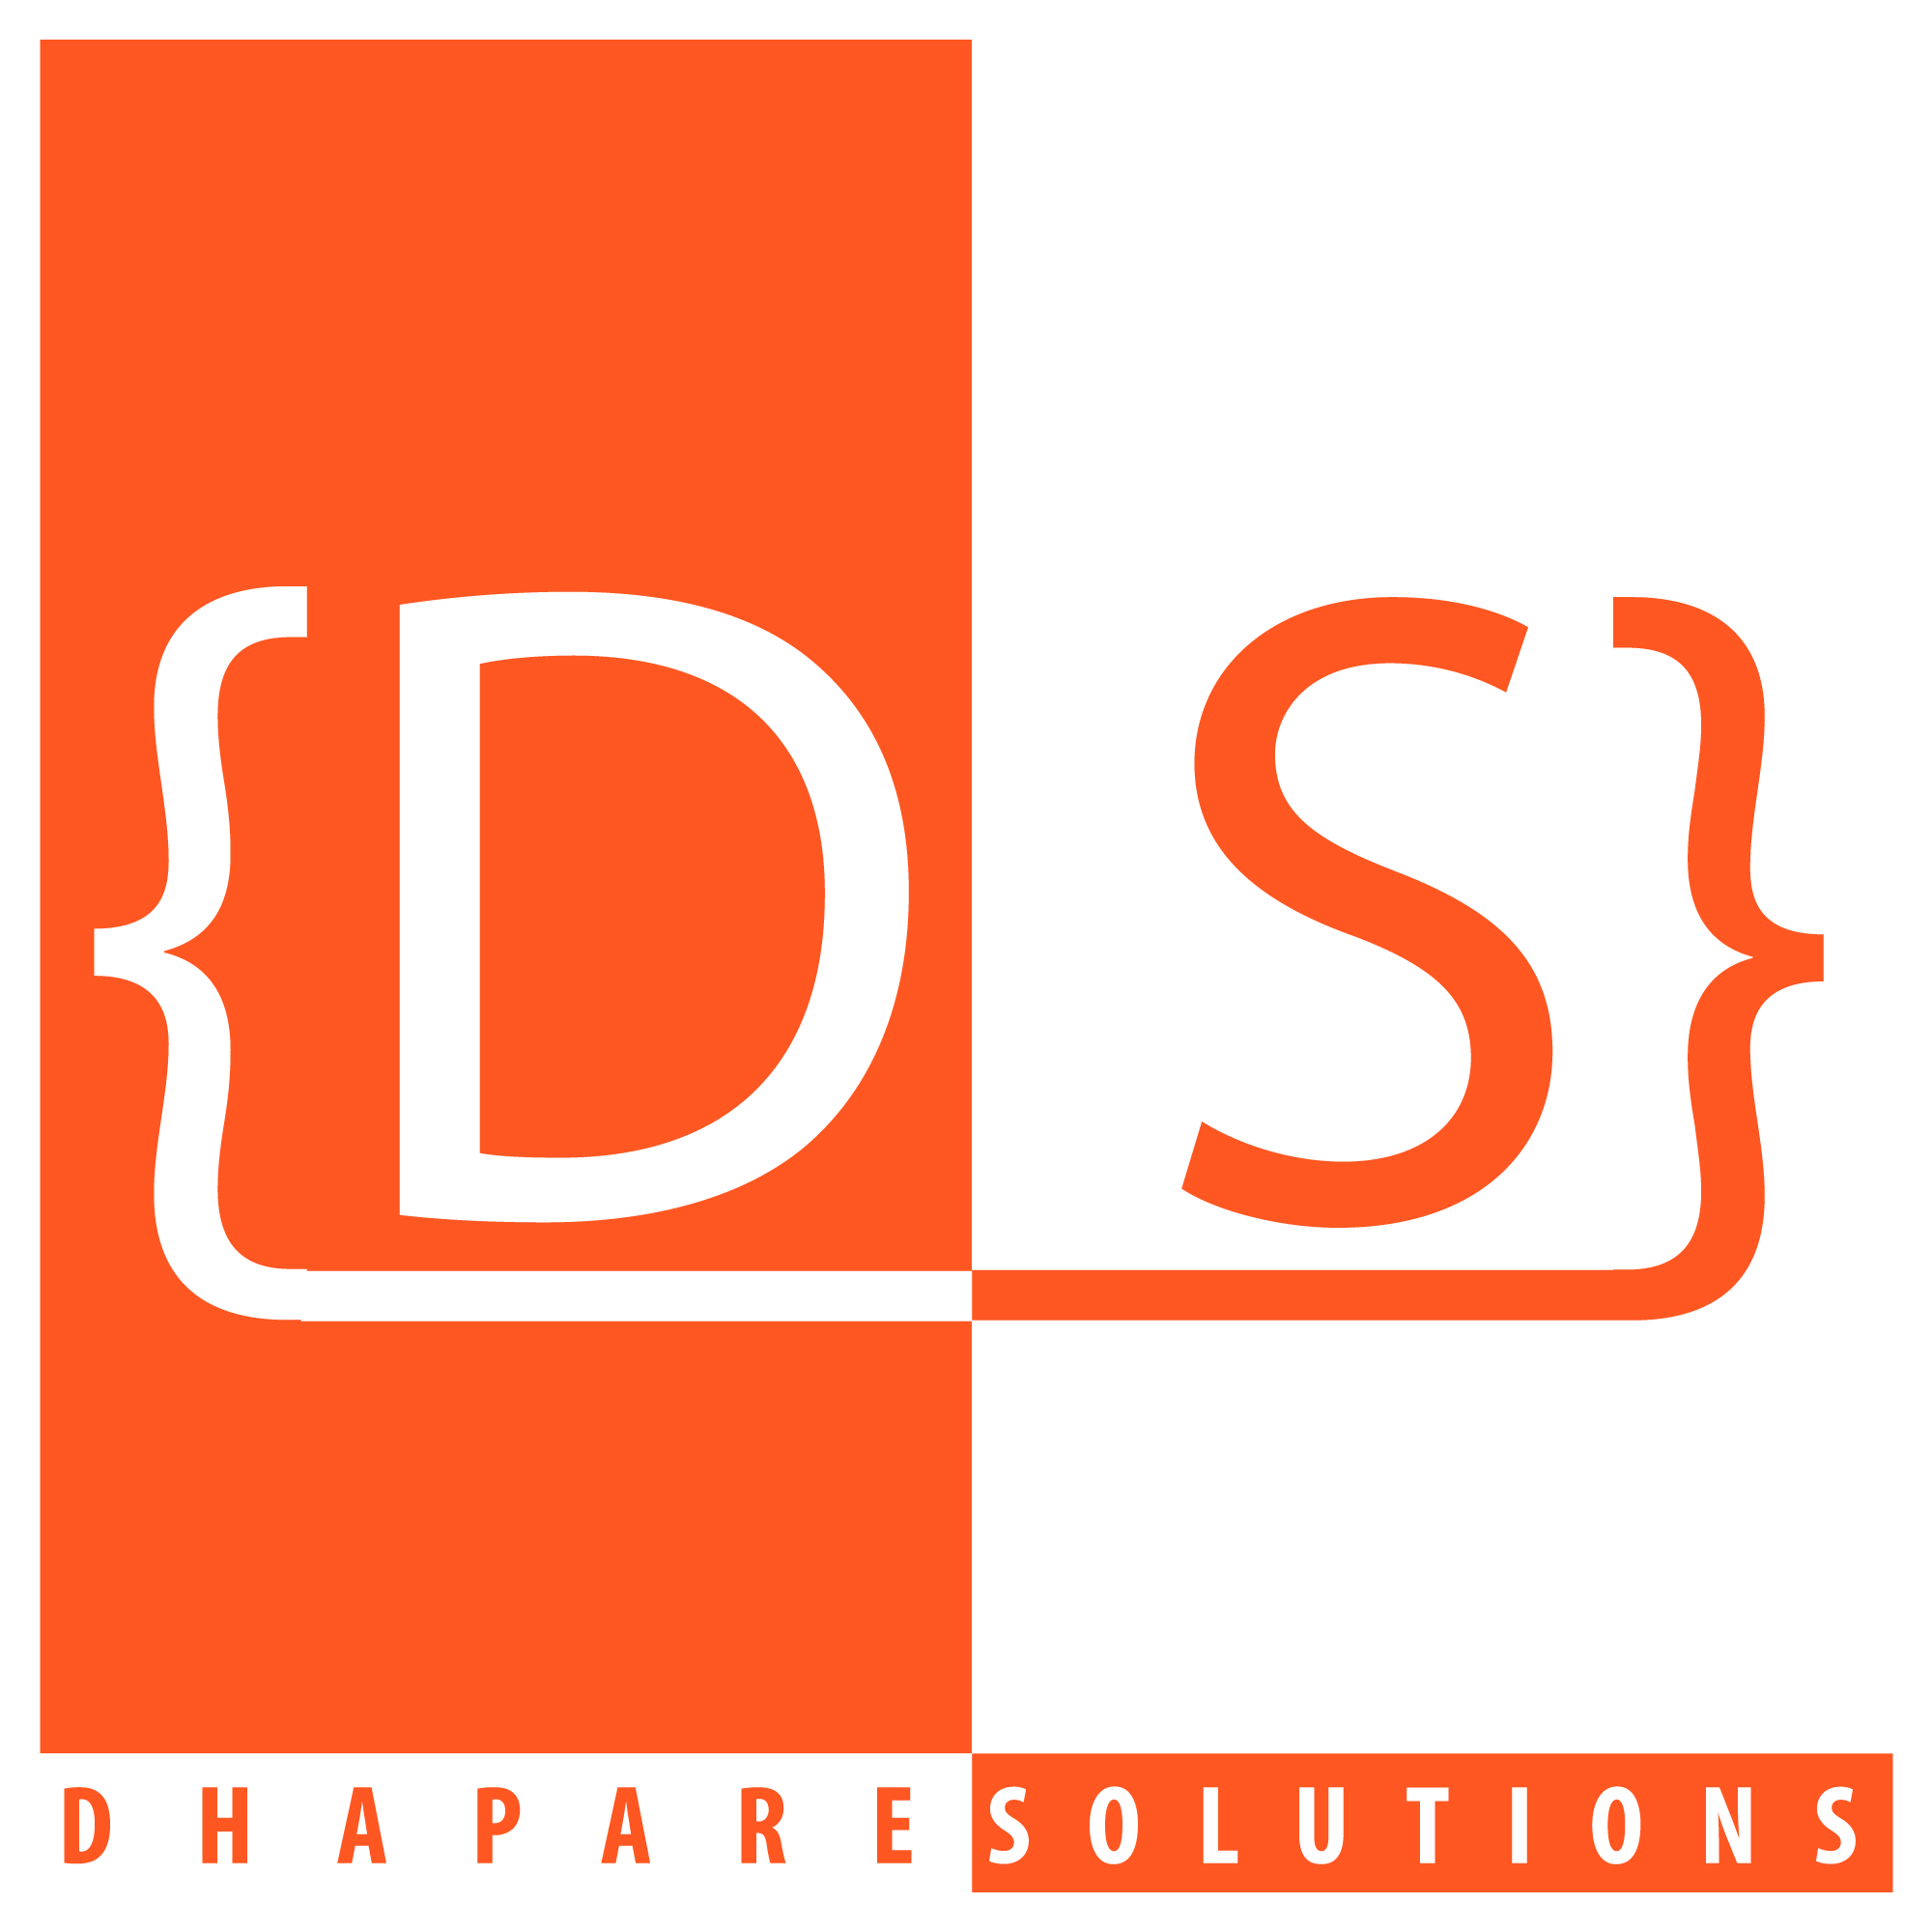 Dhapare Solutions